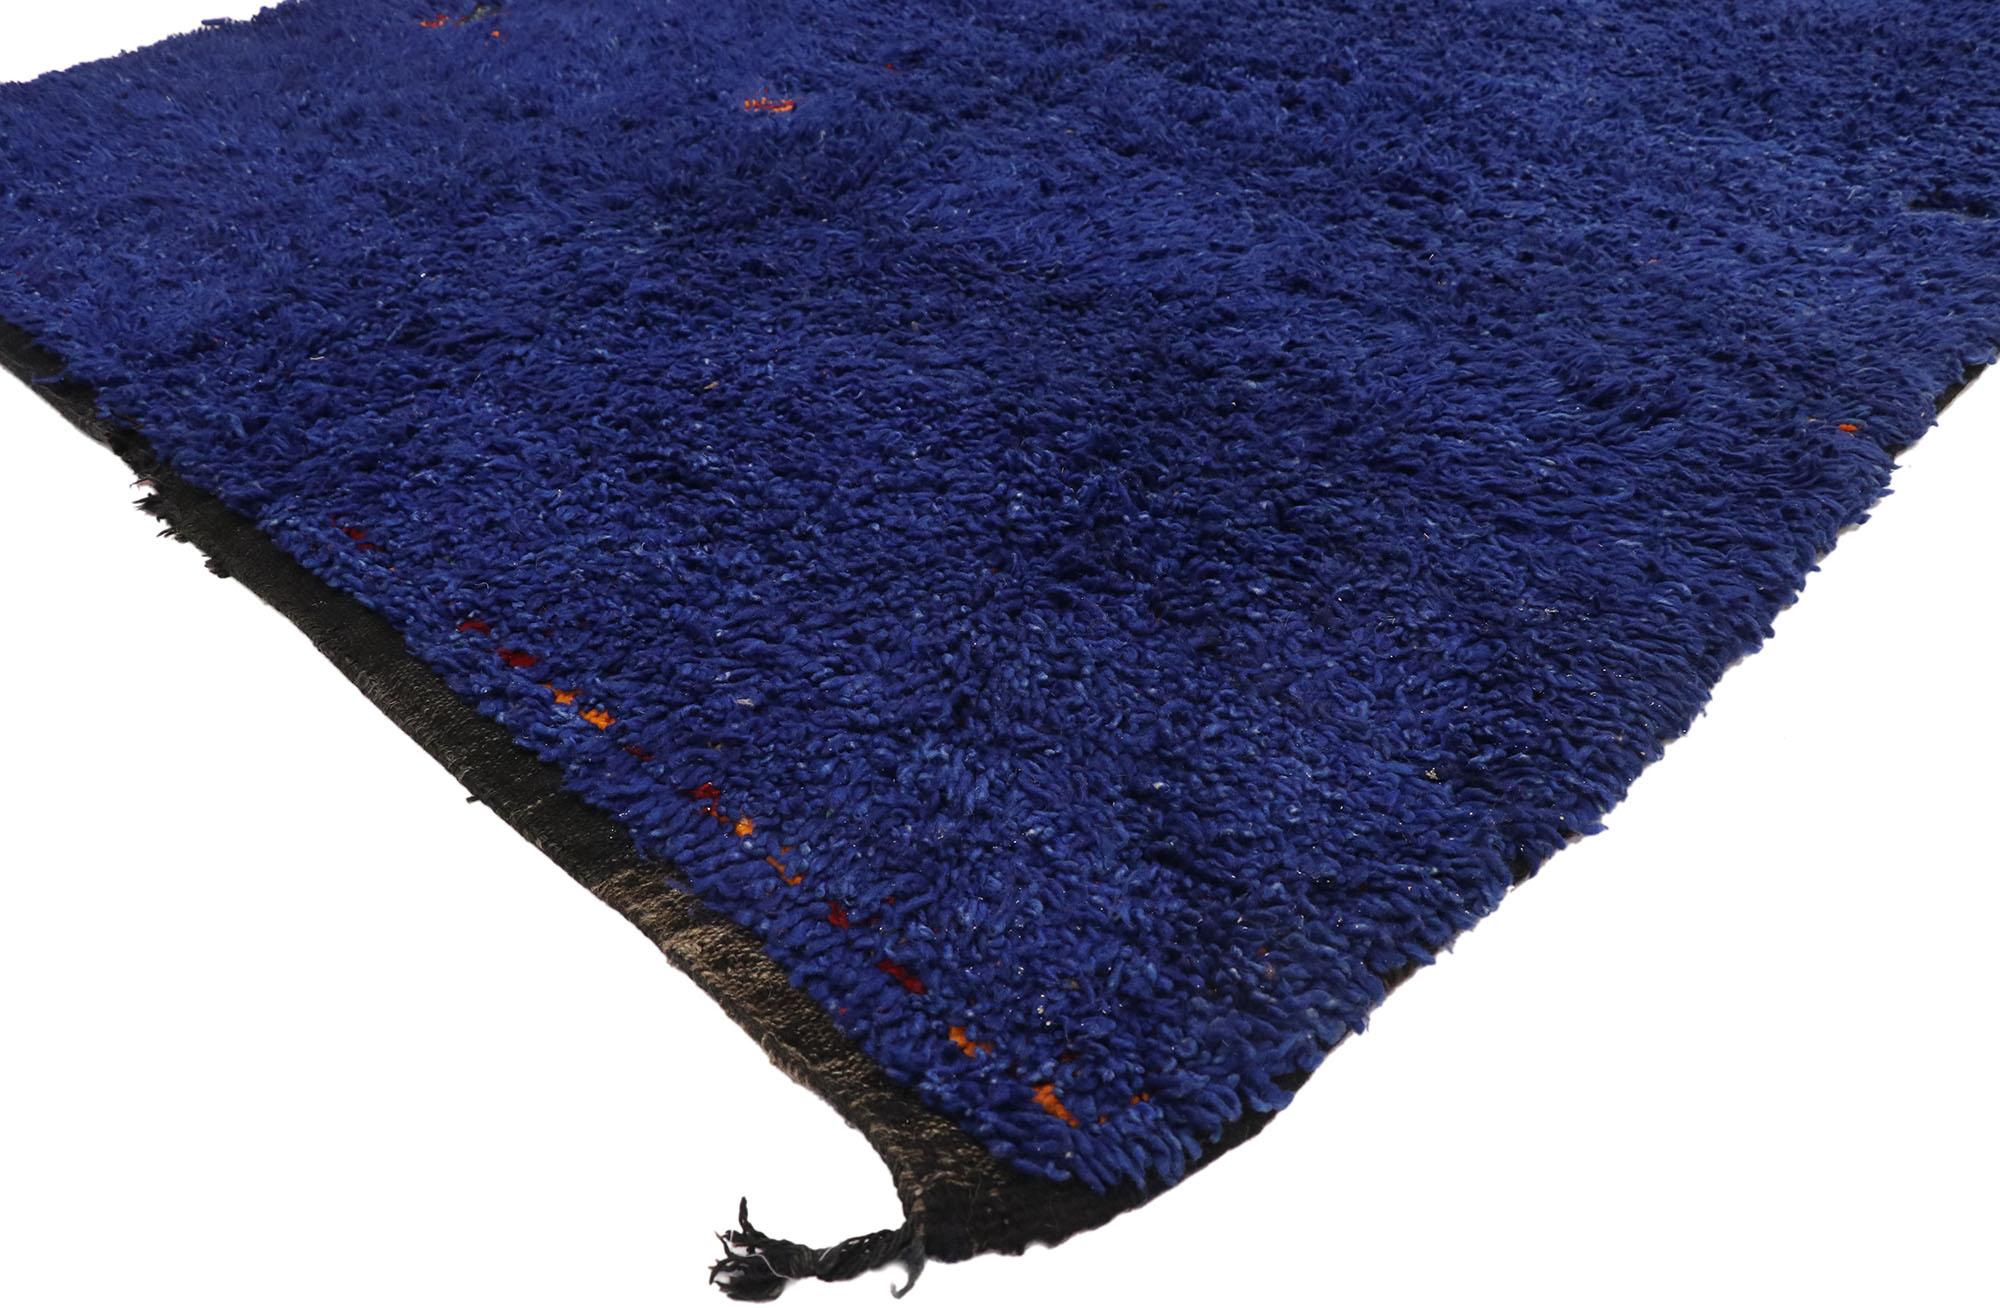 21058 VintageBlue Beni MGuild Moroccan Rug, 06'05 x 11'10. 
Embark on an enchanted journey, whisked away by the cozy embrace of this hand knotted wool vintage Beni MGuild Moroccan rug. This captivating blue Moroccan rug will take you on a magic